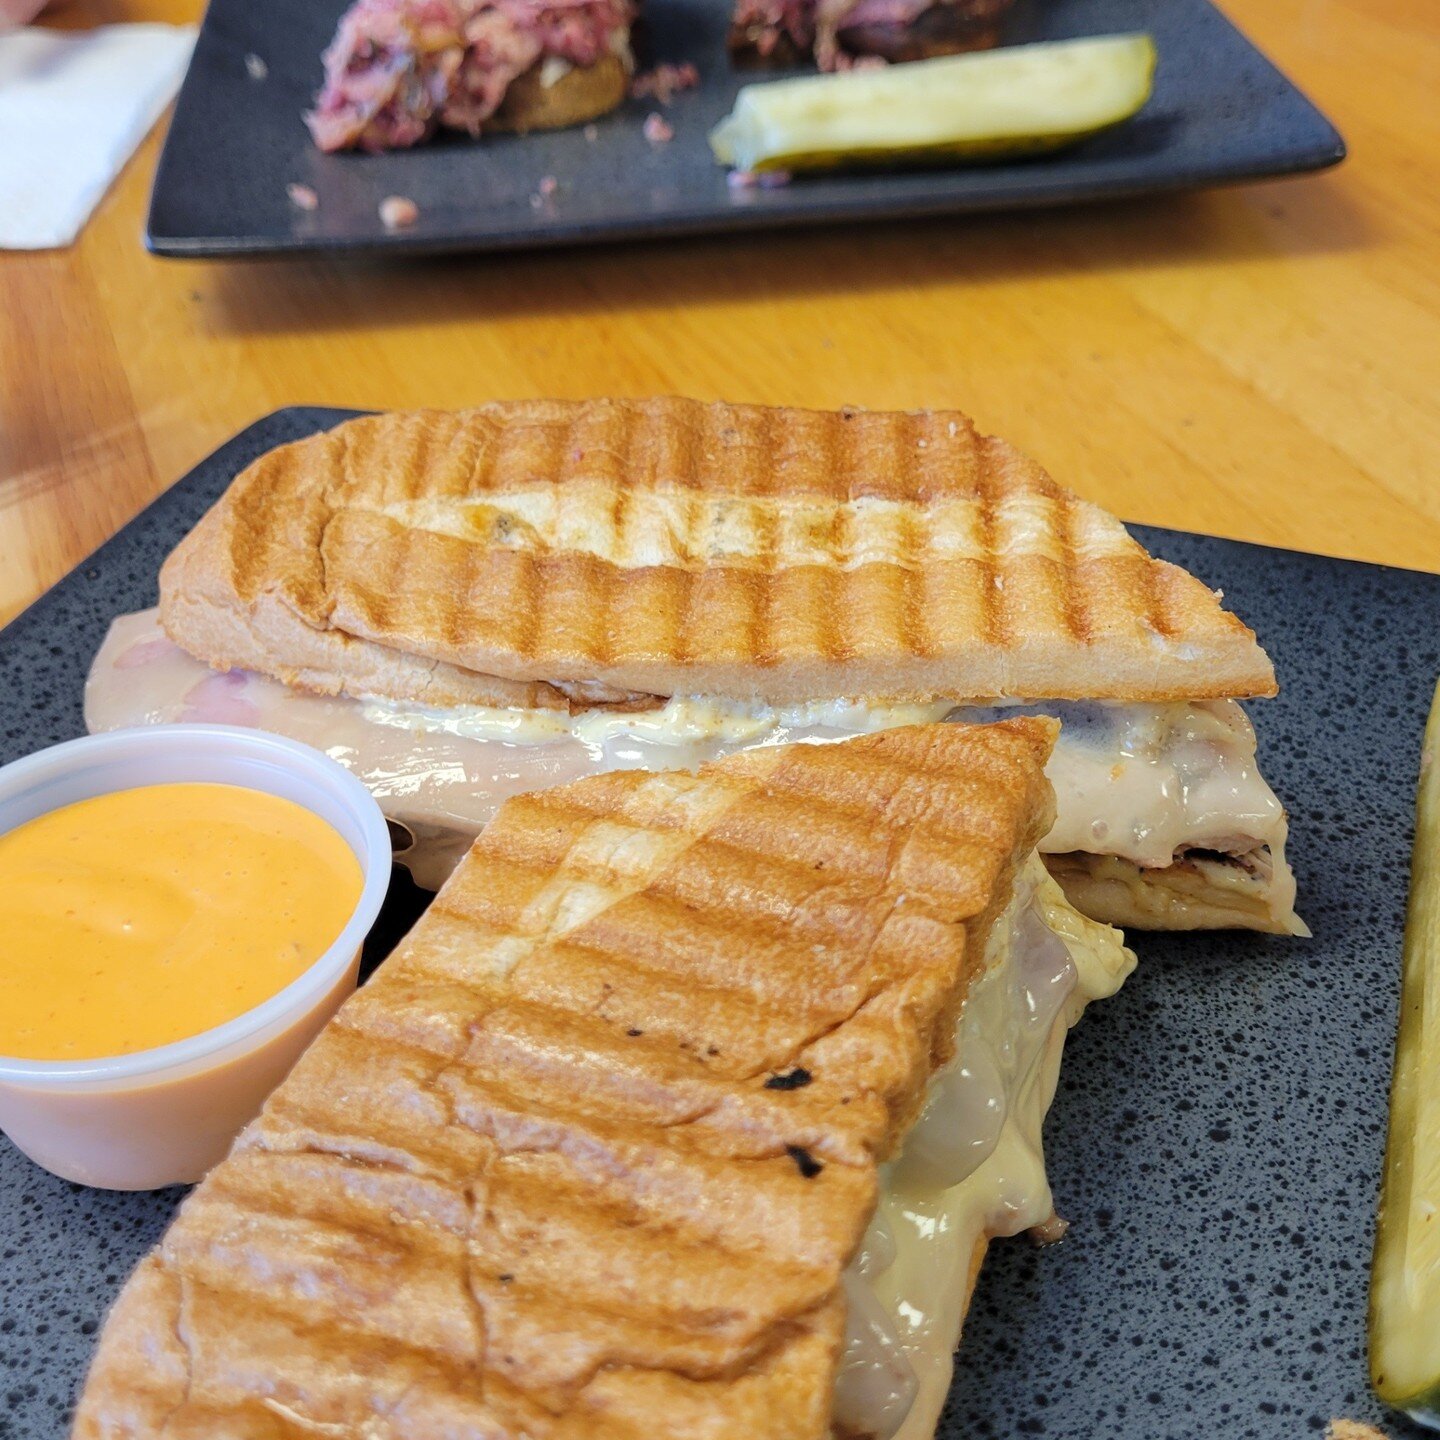 Looking to for somewhere to go for lunch? Add Jordyn's Deli to your list of must visit places while you visit Martinsburg-Berkeley County WV. 
#deli #eatlocal #visitmartinsburgwv #berkeleycountywv